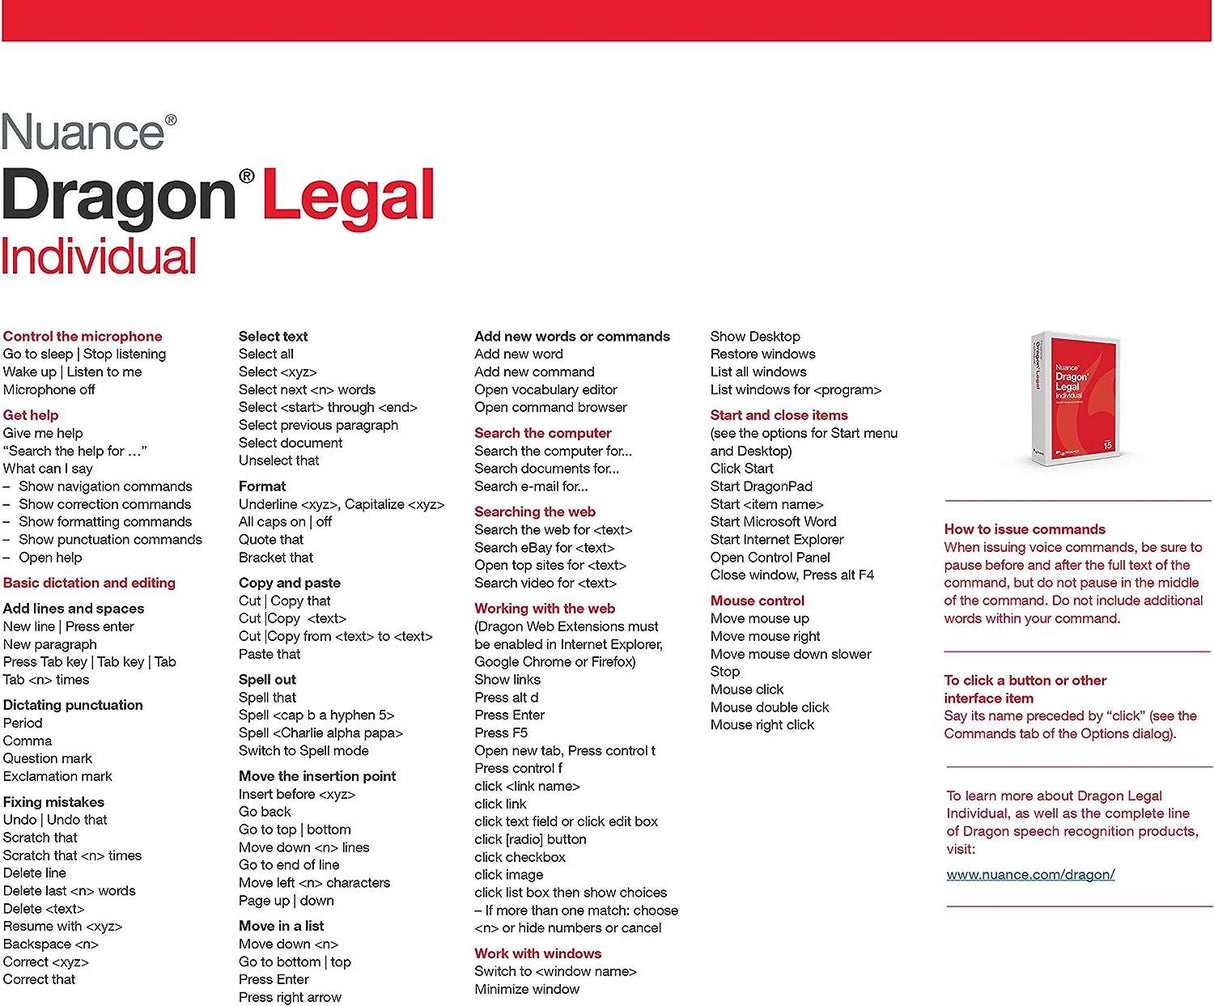 Nuance Dragon Legal 15 - Instant Download for Windows (1 Computer) - SoftwareCW - Authorized Reseller